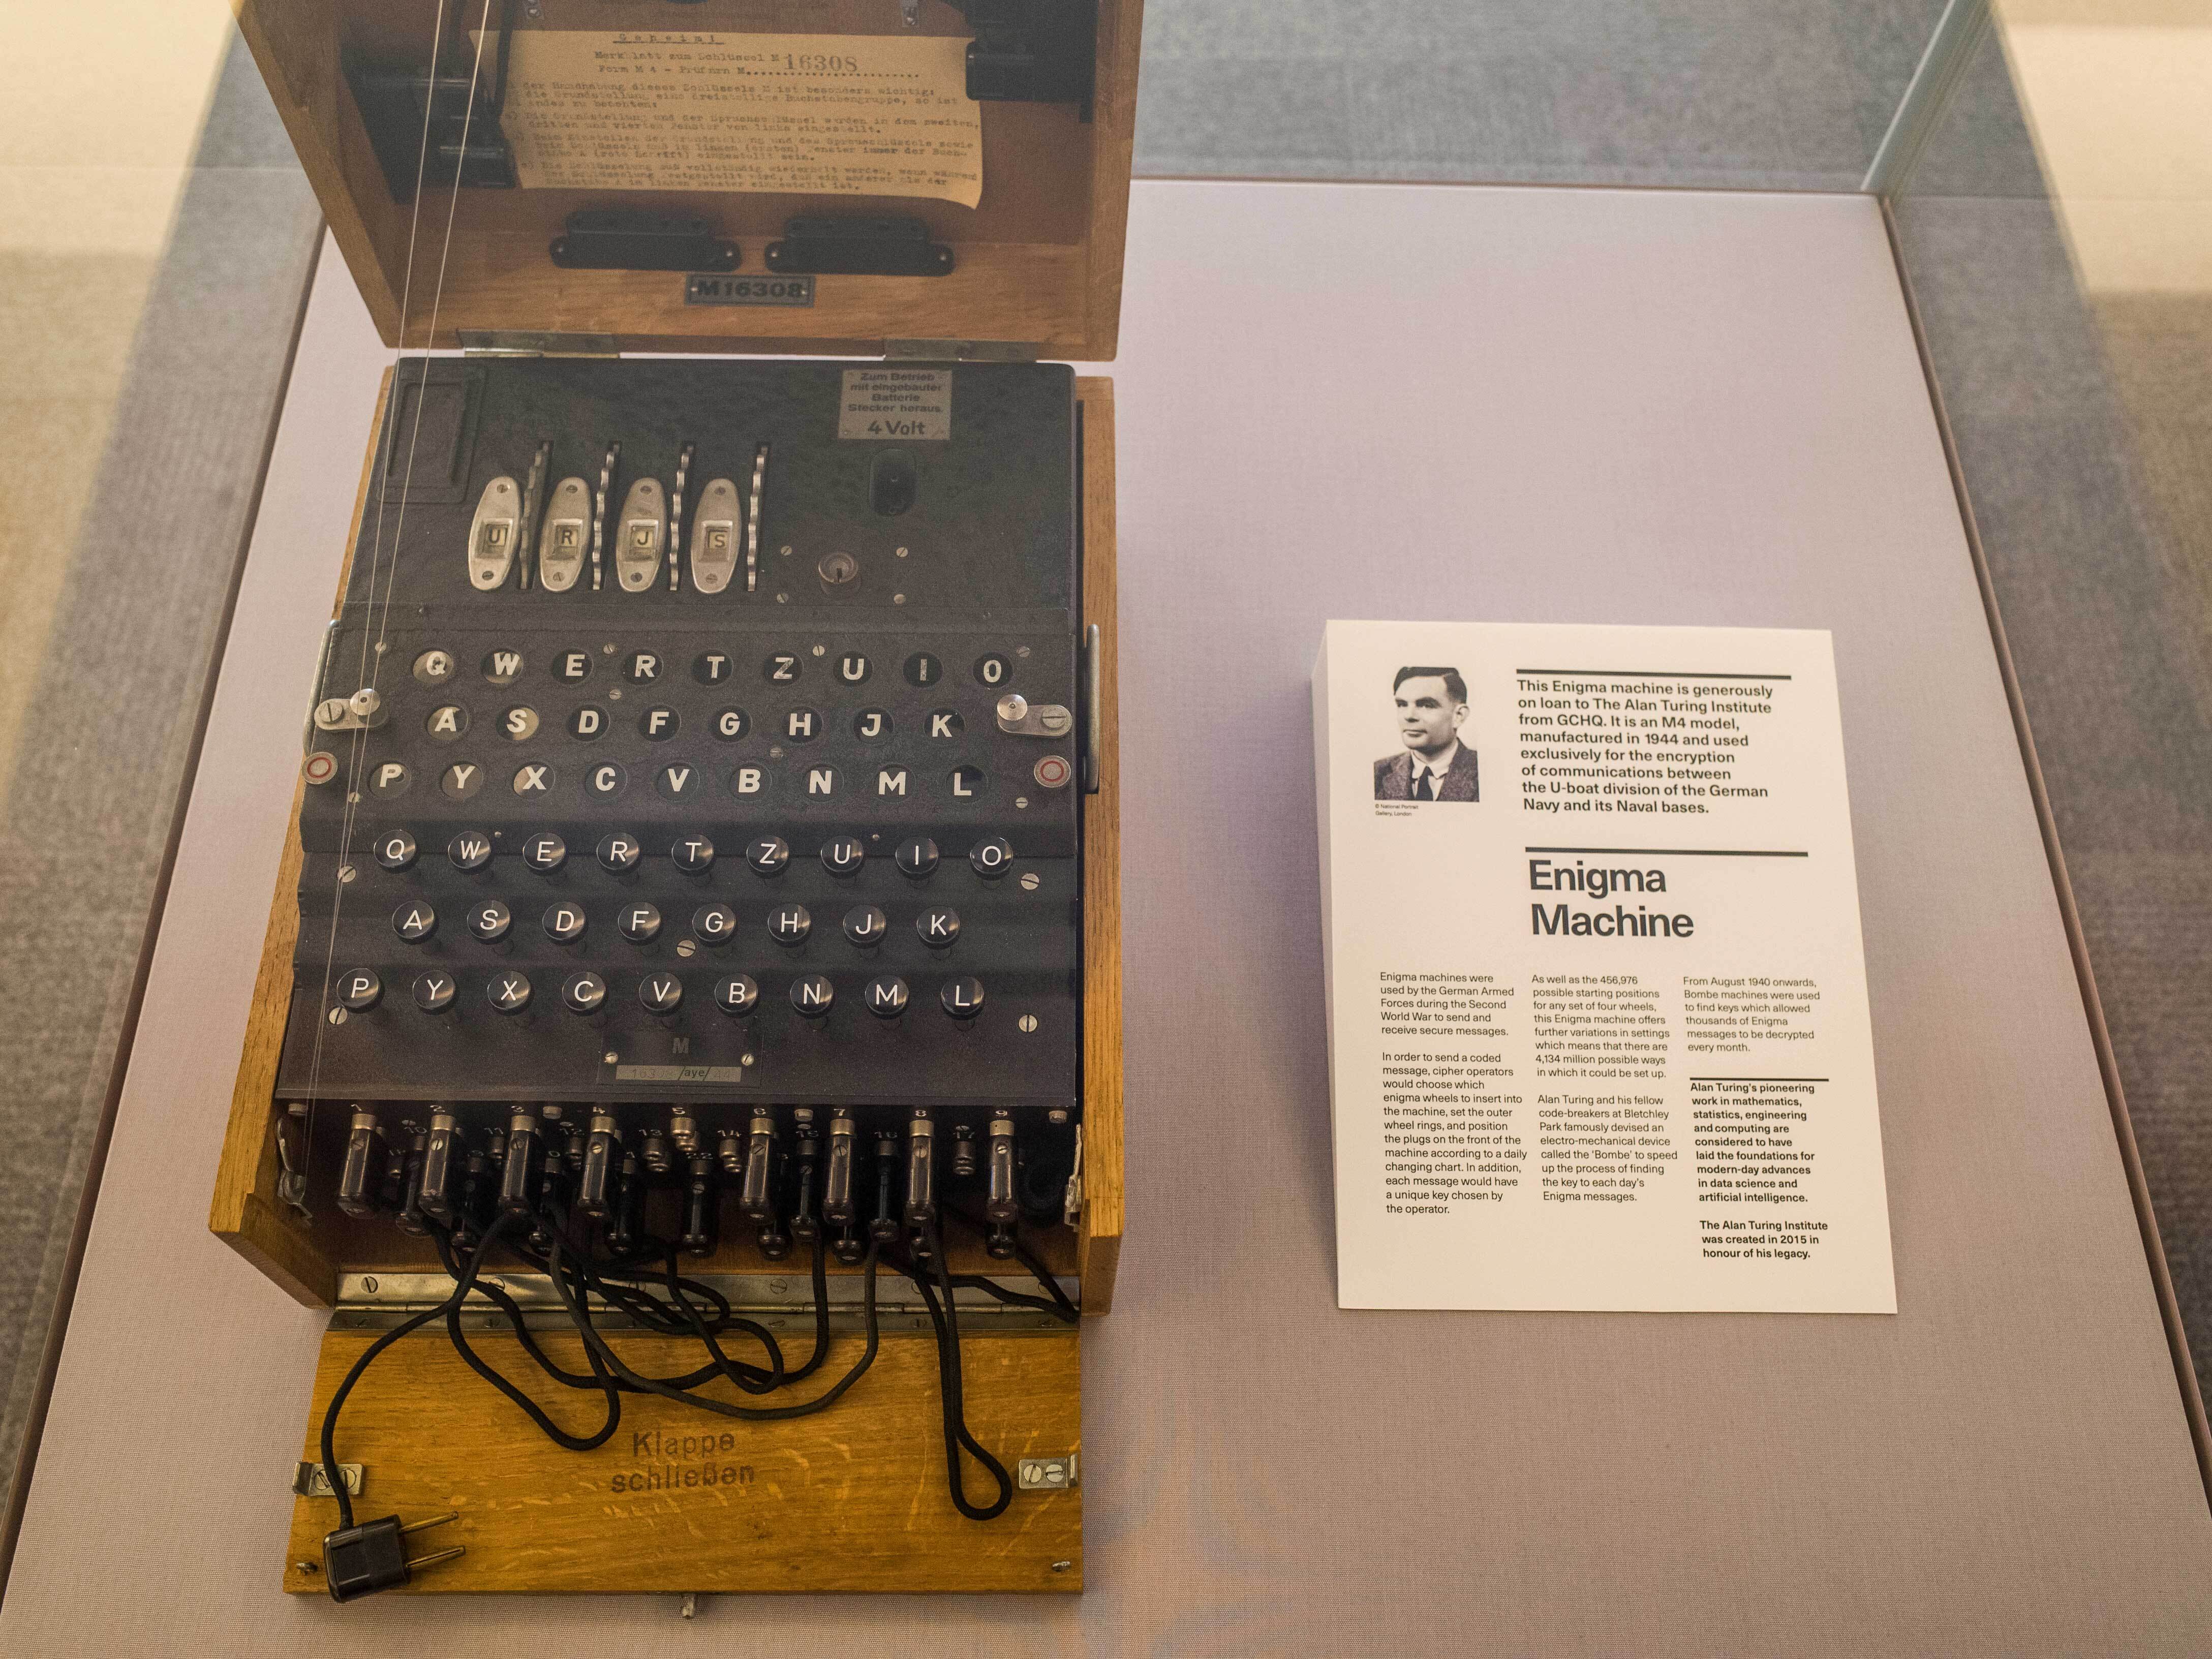 Alan Turing’s Everlasting Contributions to Computing, AI and Cryptography